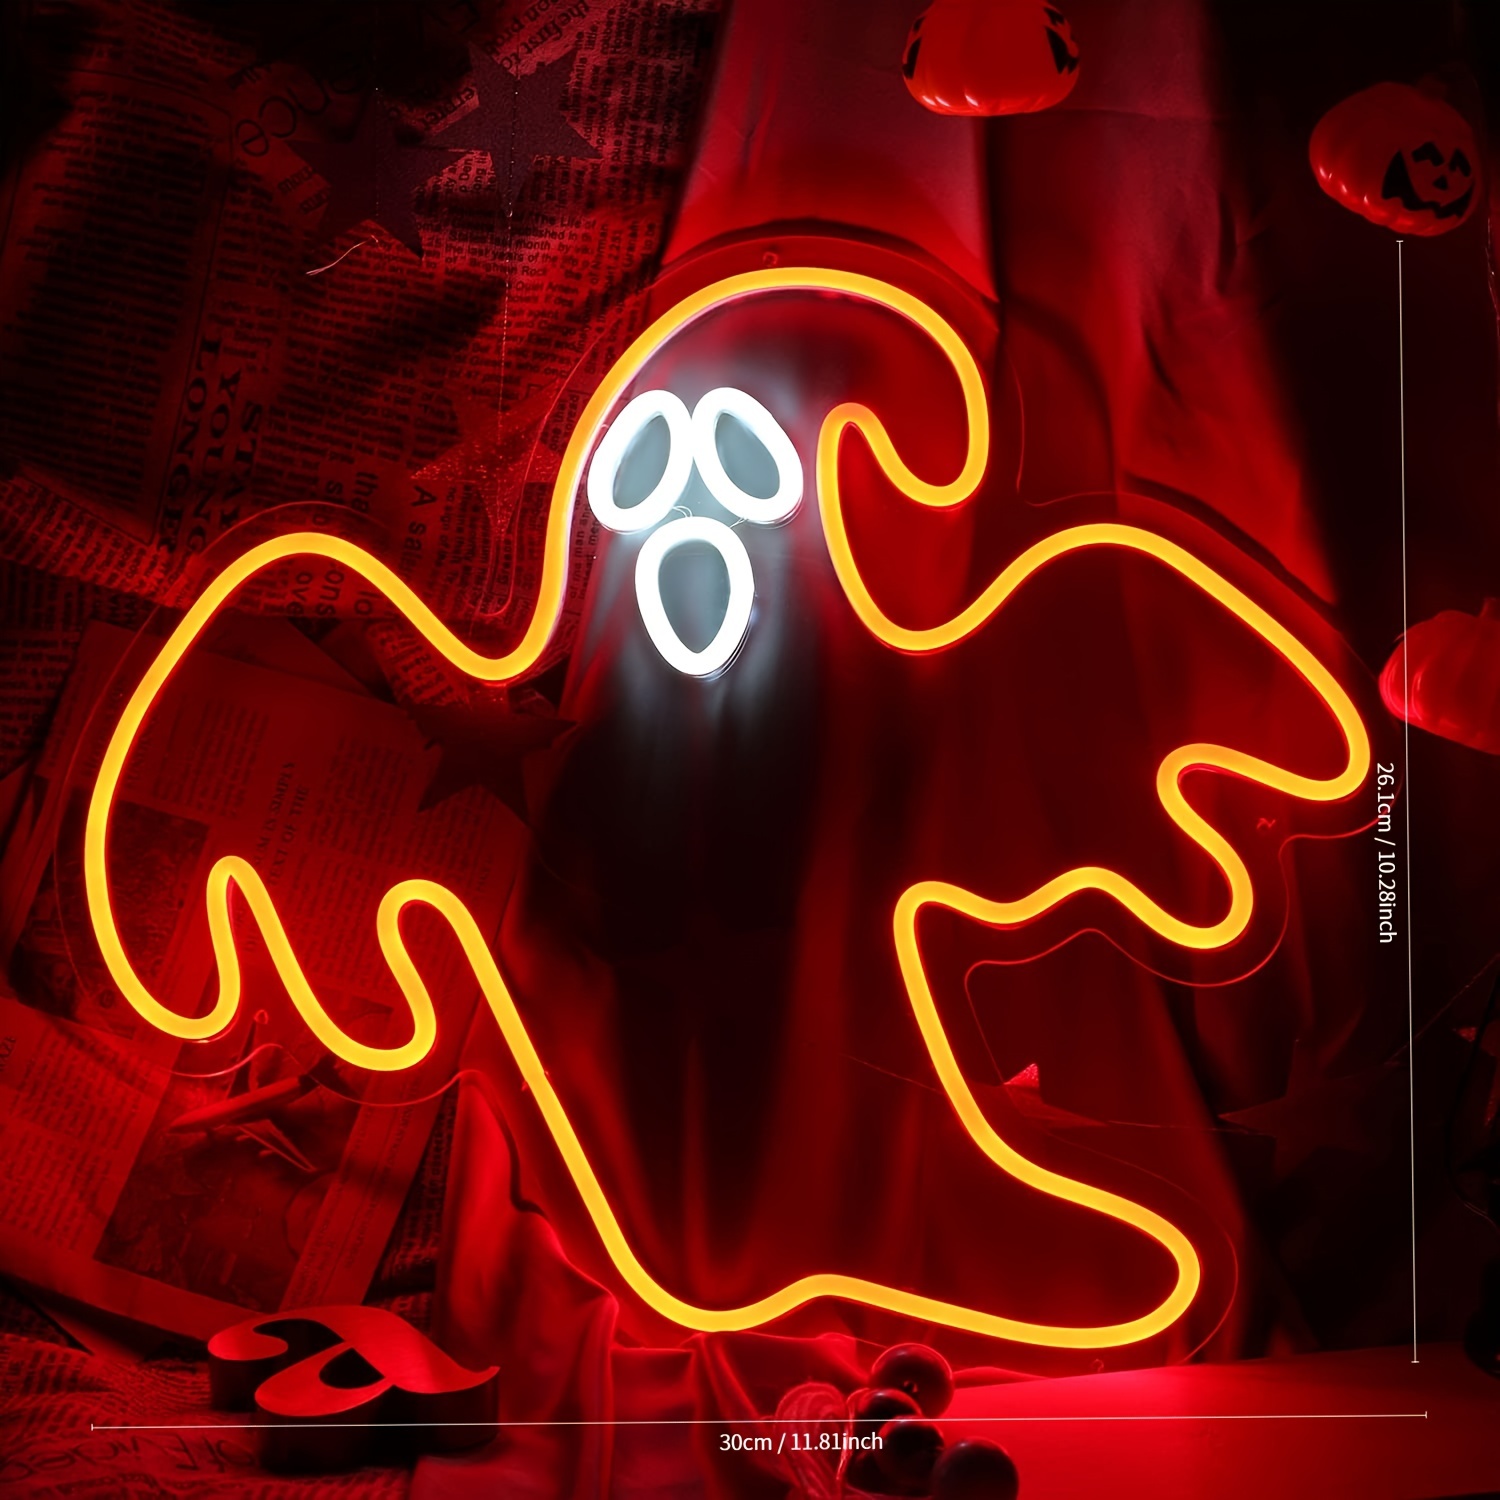 The first neon ghost.